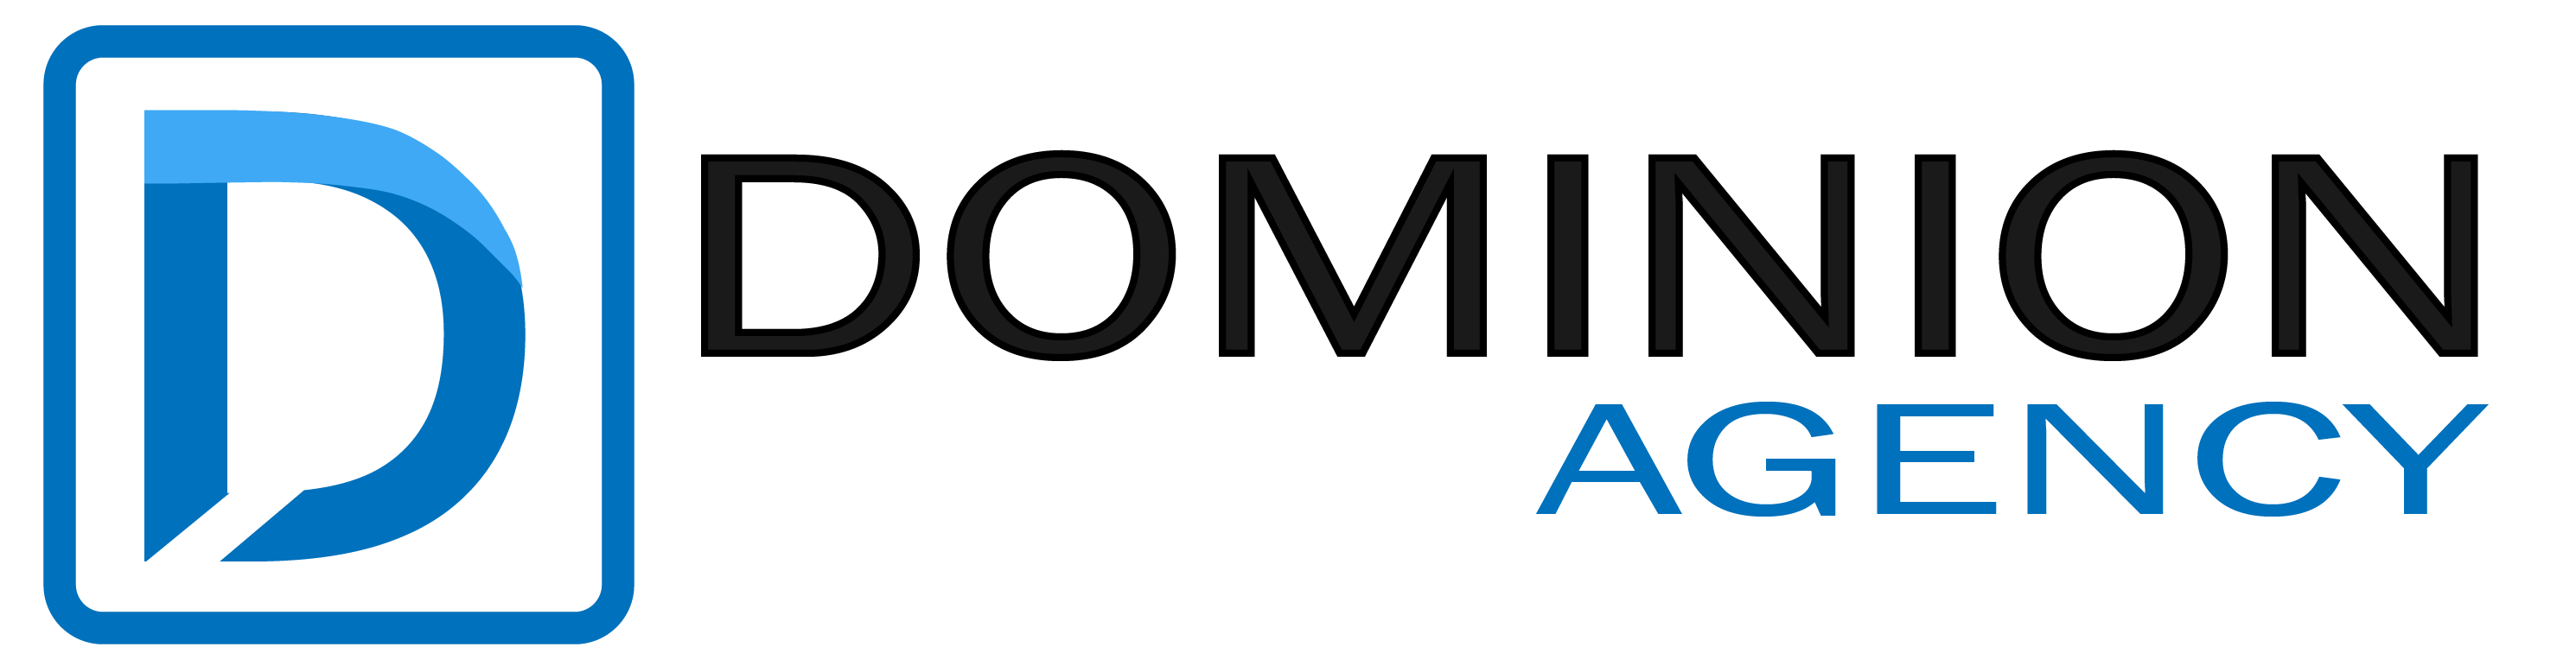 dominion-agency-itineraries